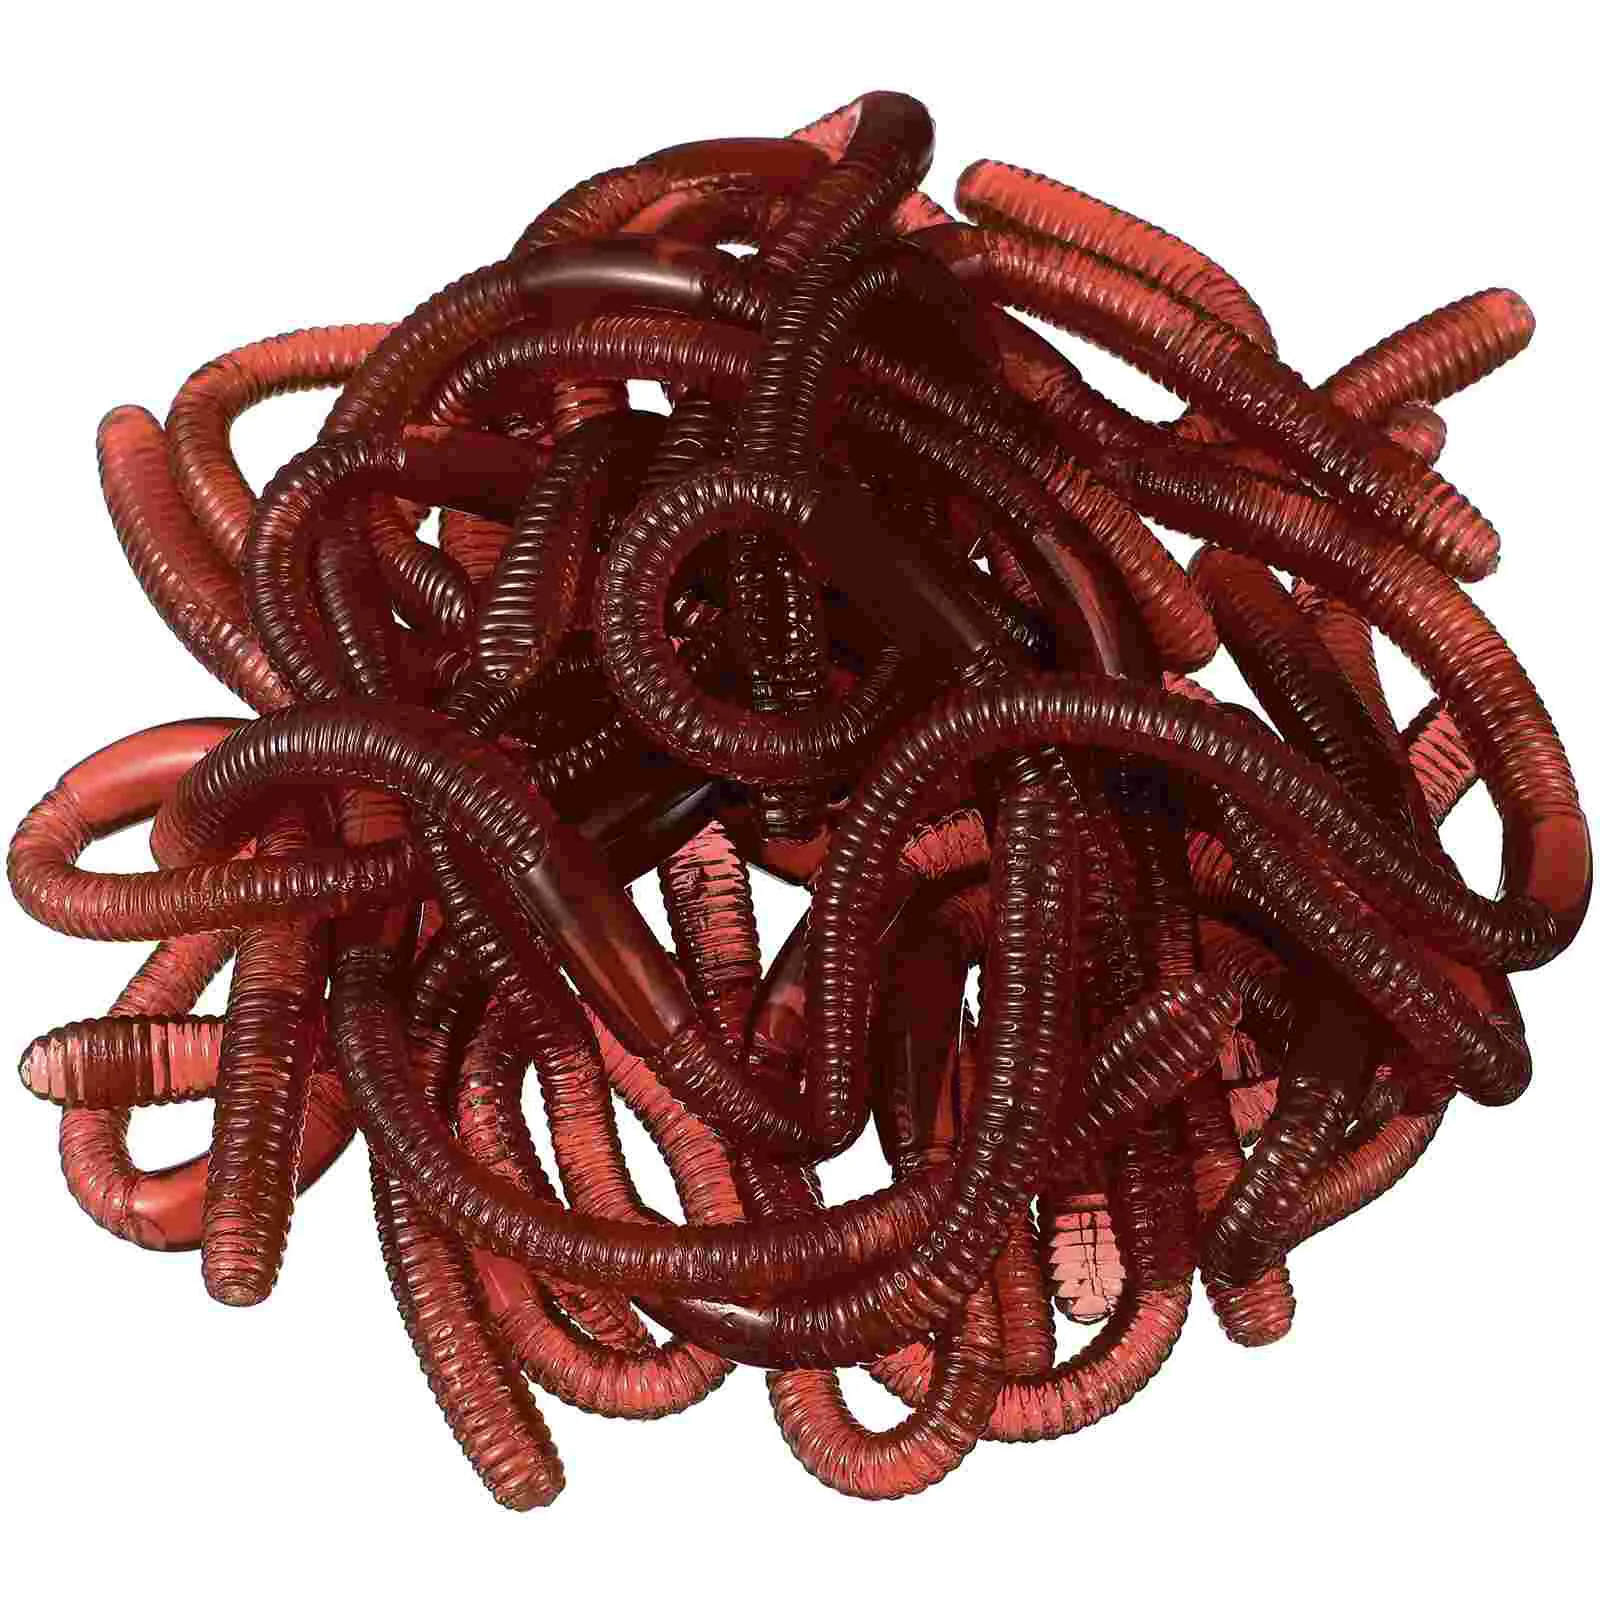 

25 Pcs Artificial Earthworm Fake Worms Toy Animals Toys Elasticity Faux Model Plastic Earthworms